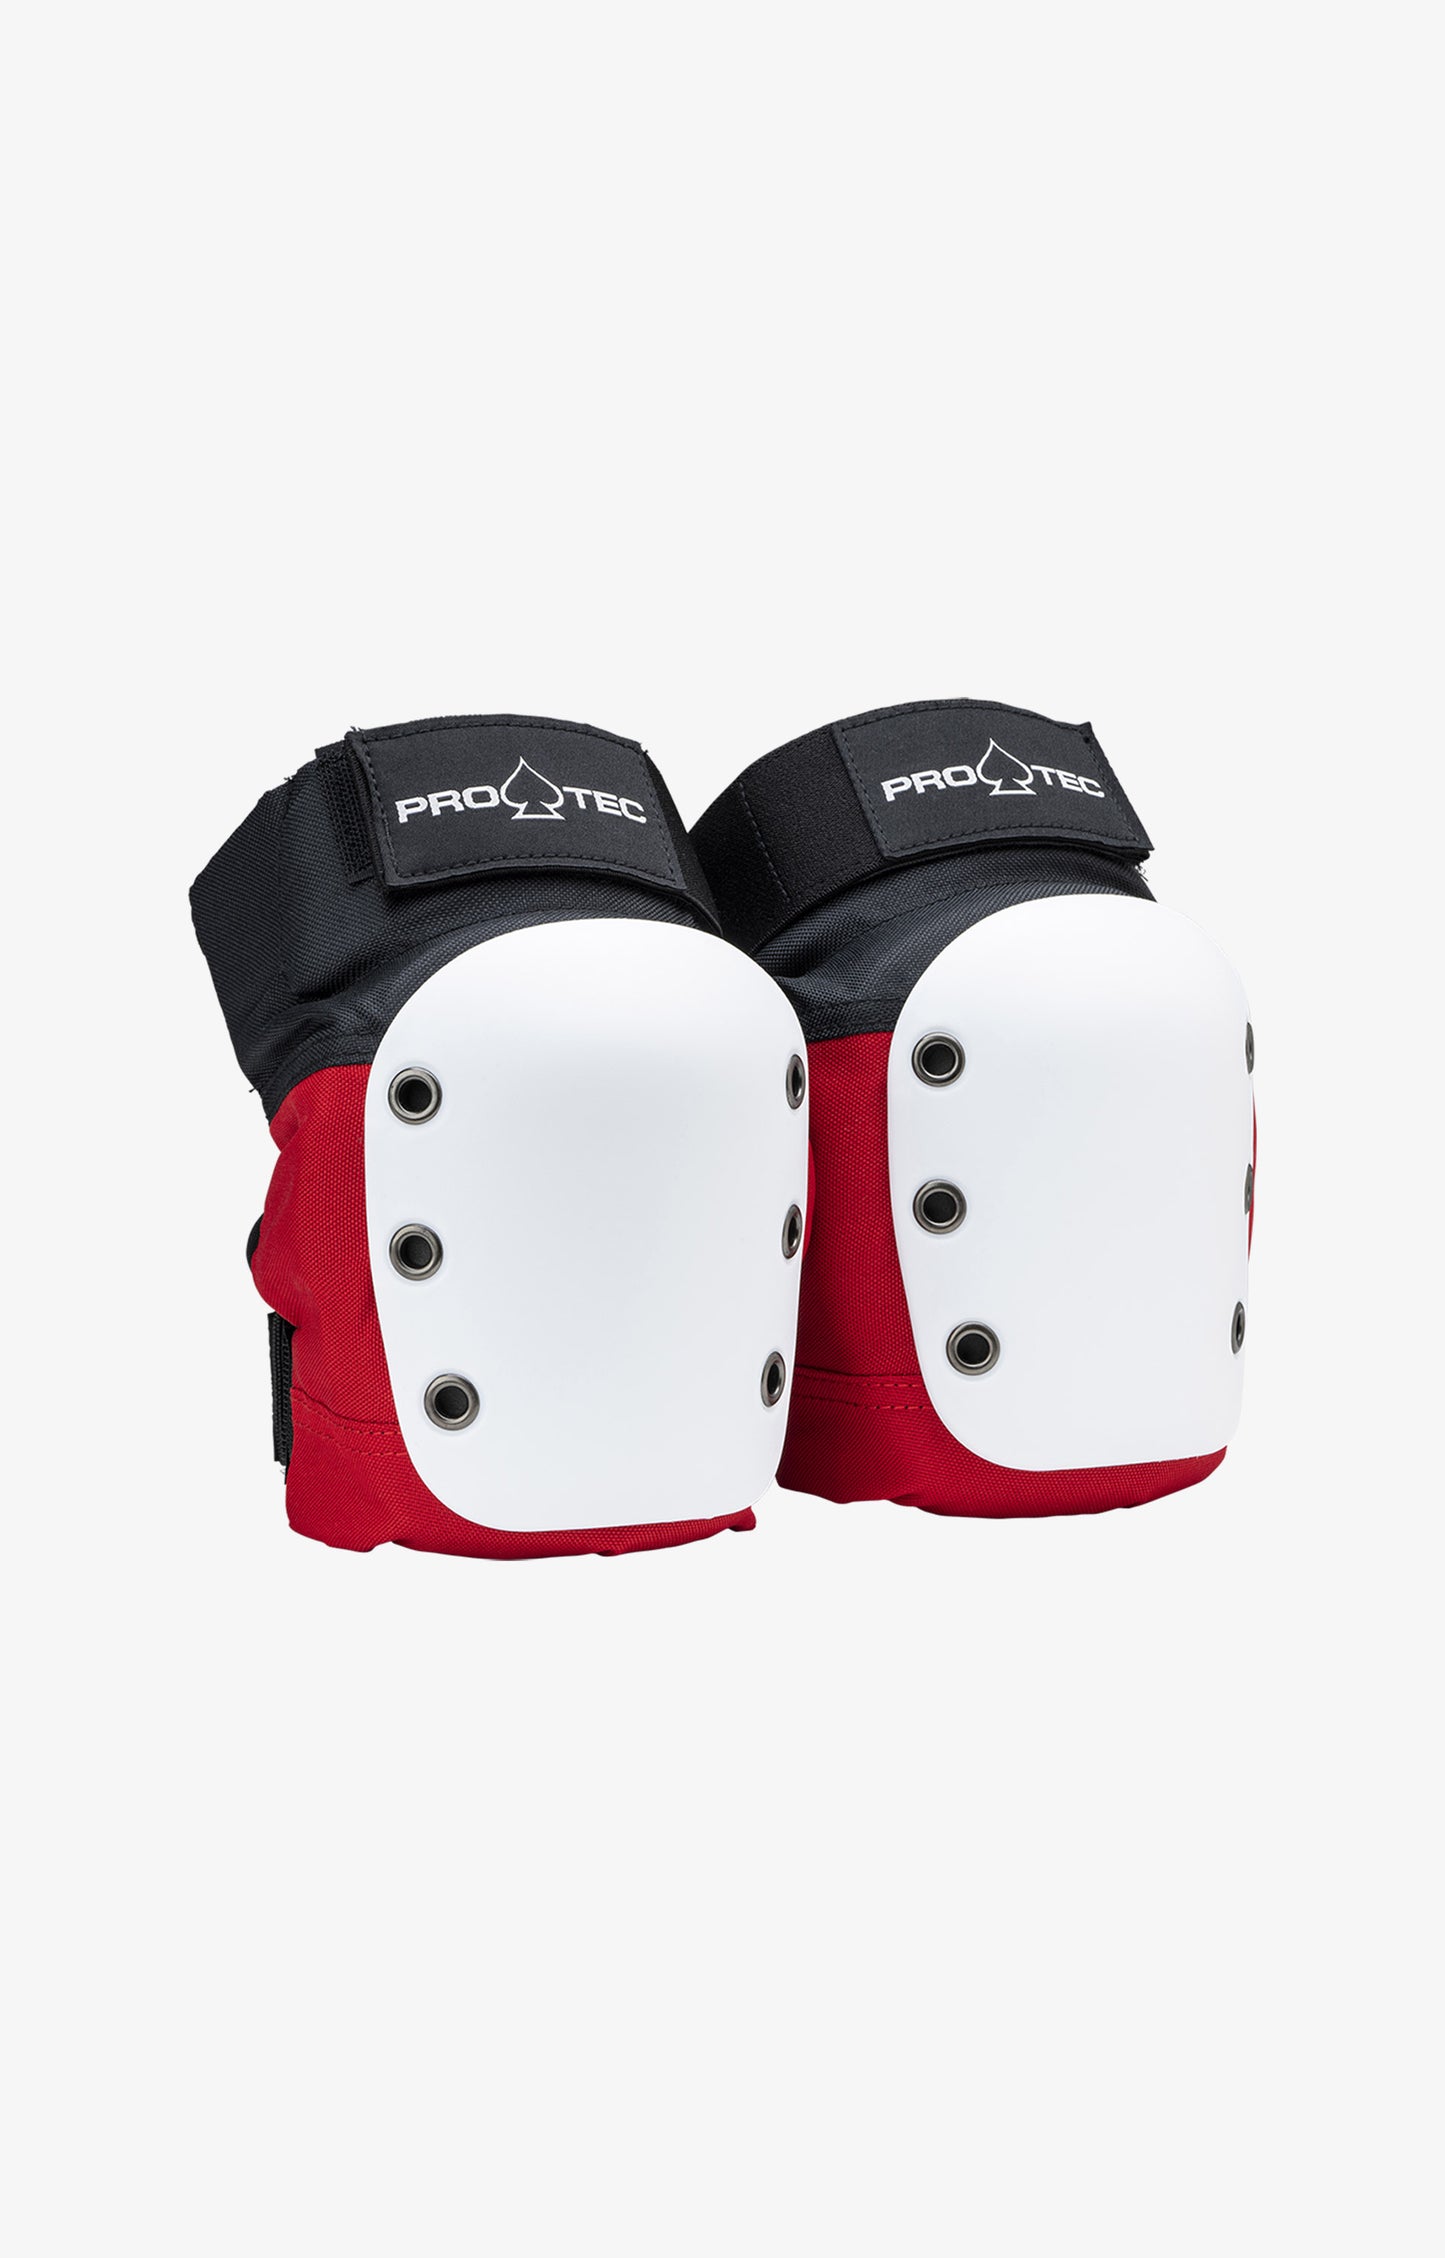 Pro-Tec Street Junior Protective 3 Pack Wrist Guards and Pads, Red